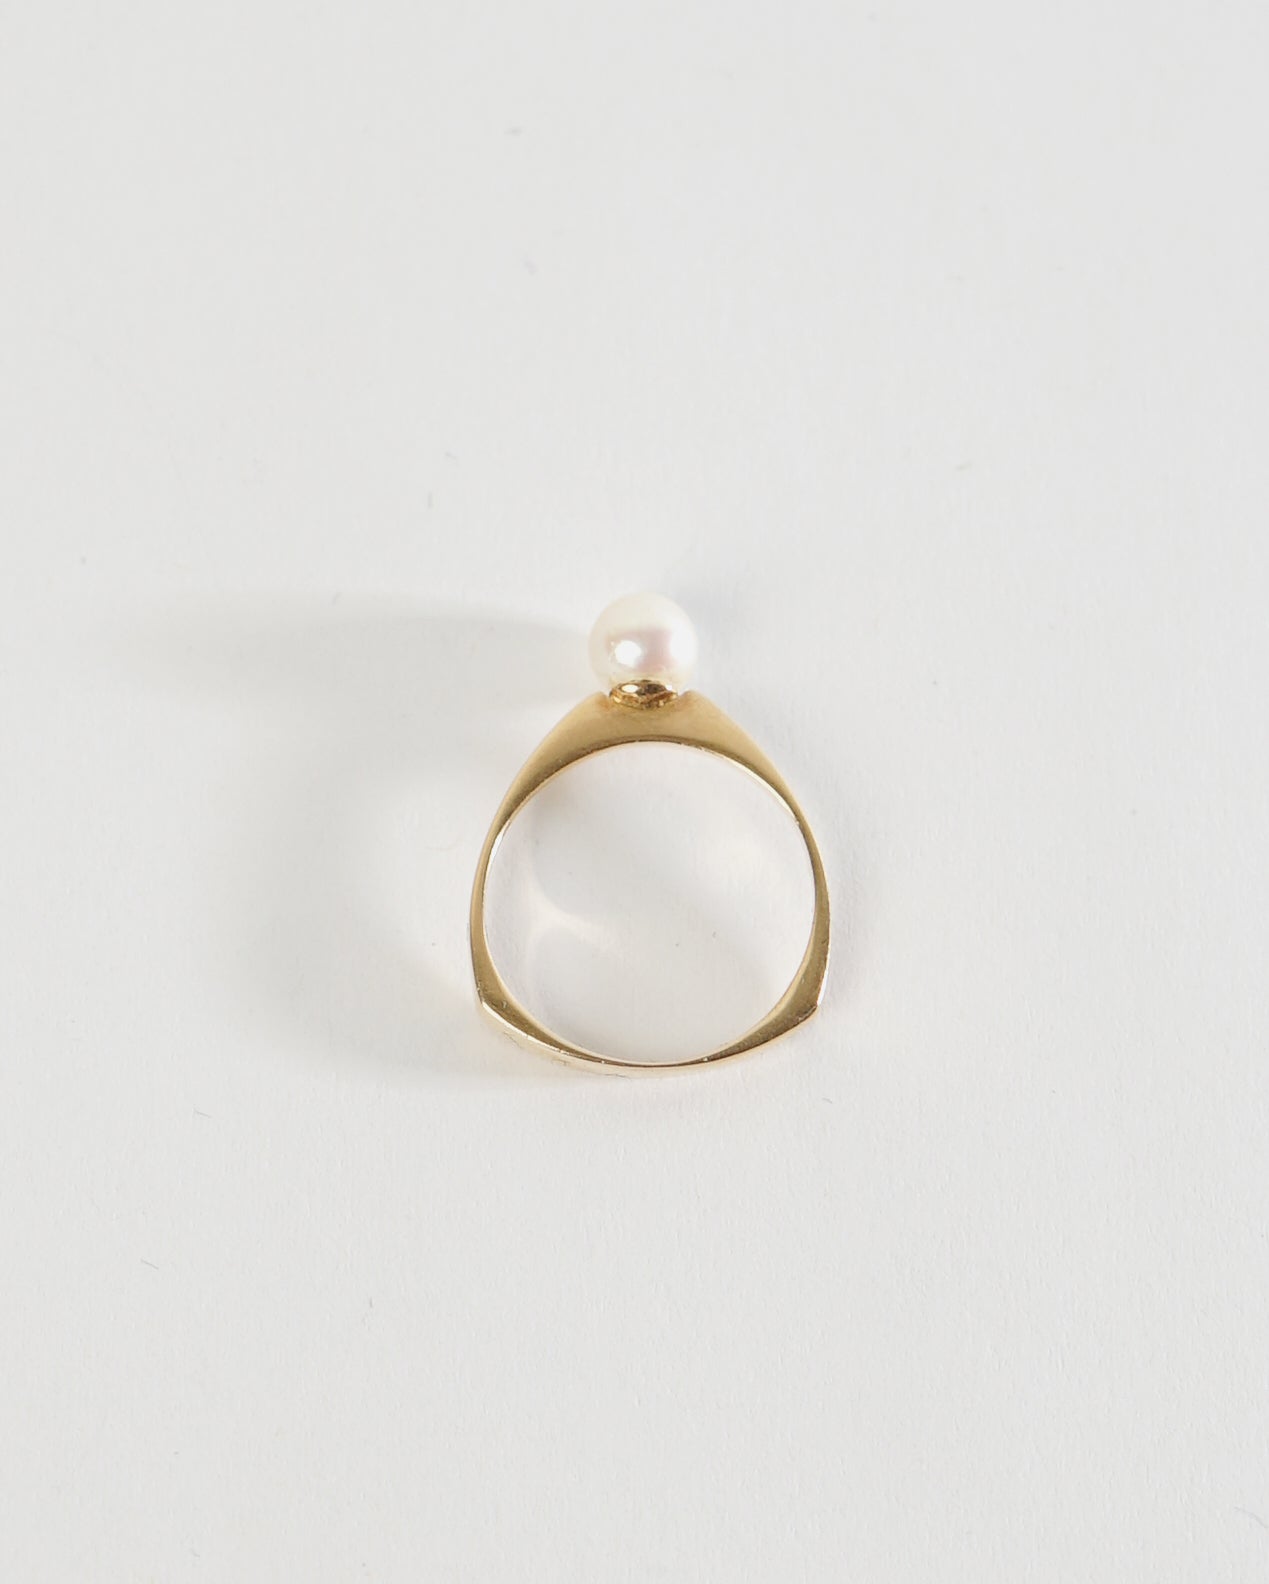 18k Gold Ring w/ Pearl / size: 7.5